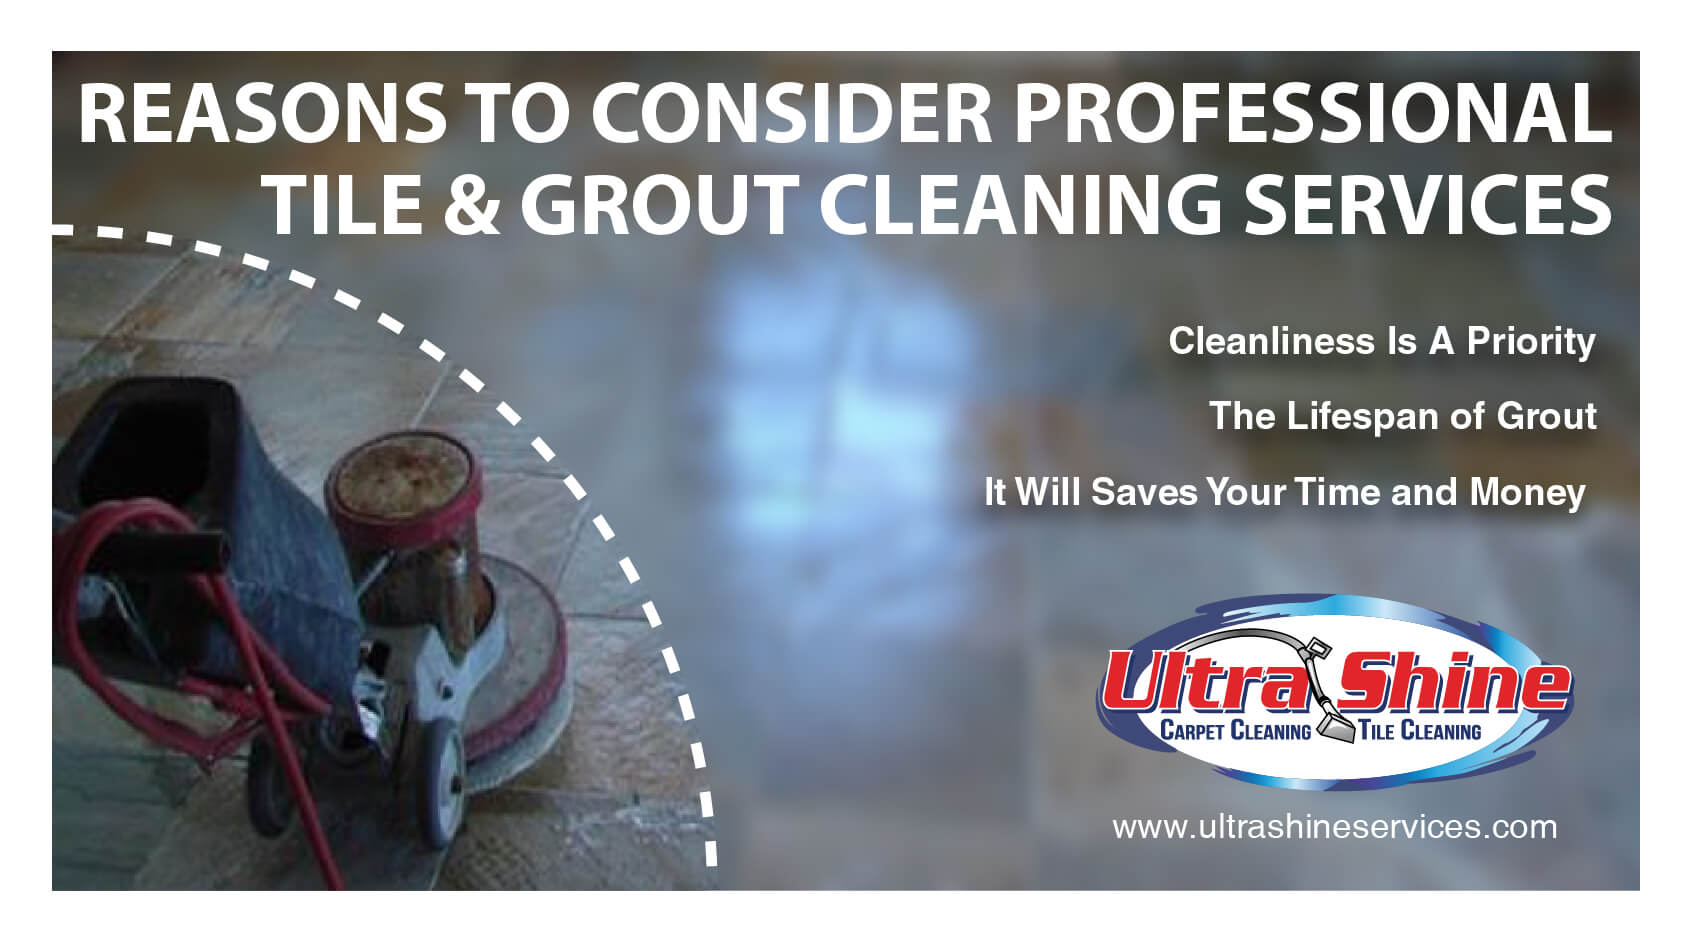 Professional Tile & Grout Cleaning Services